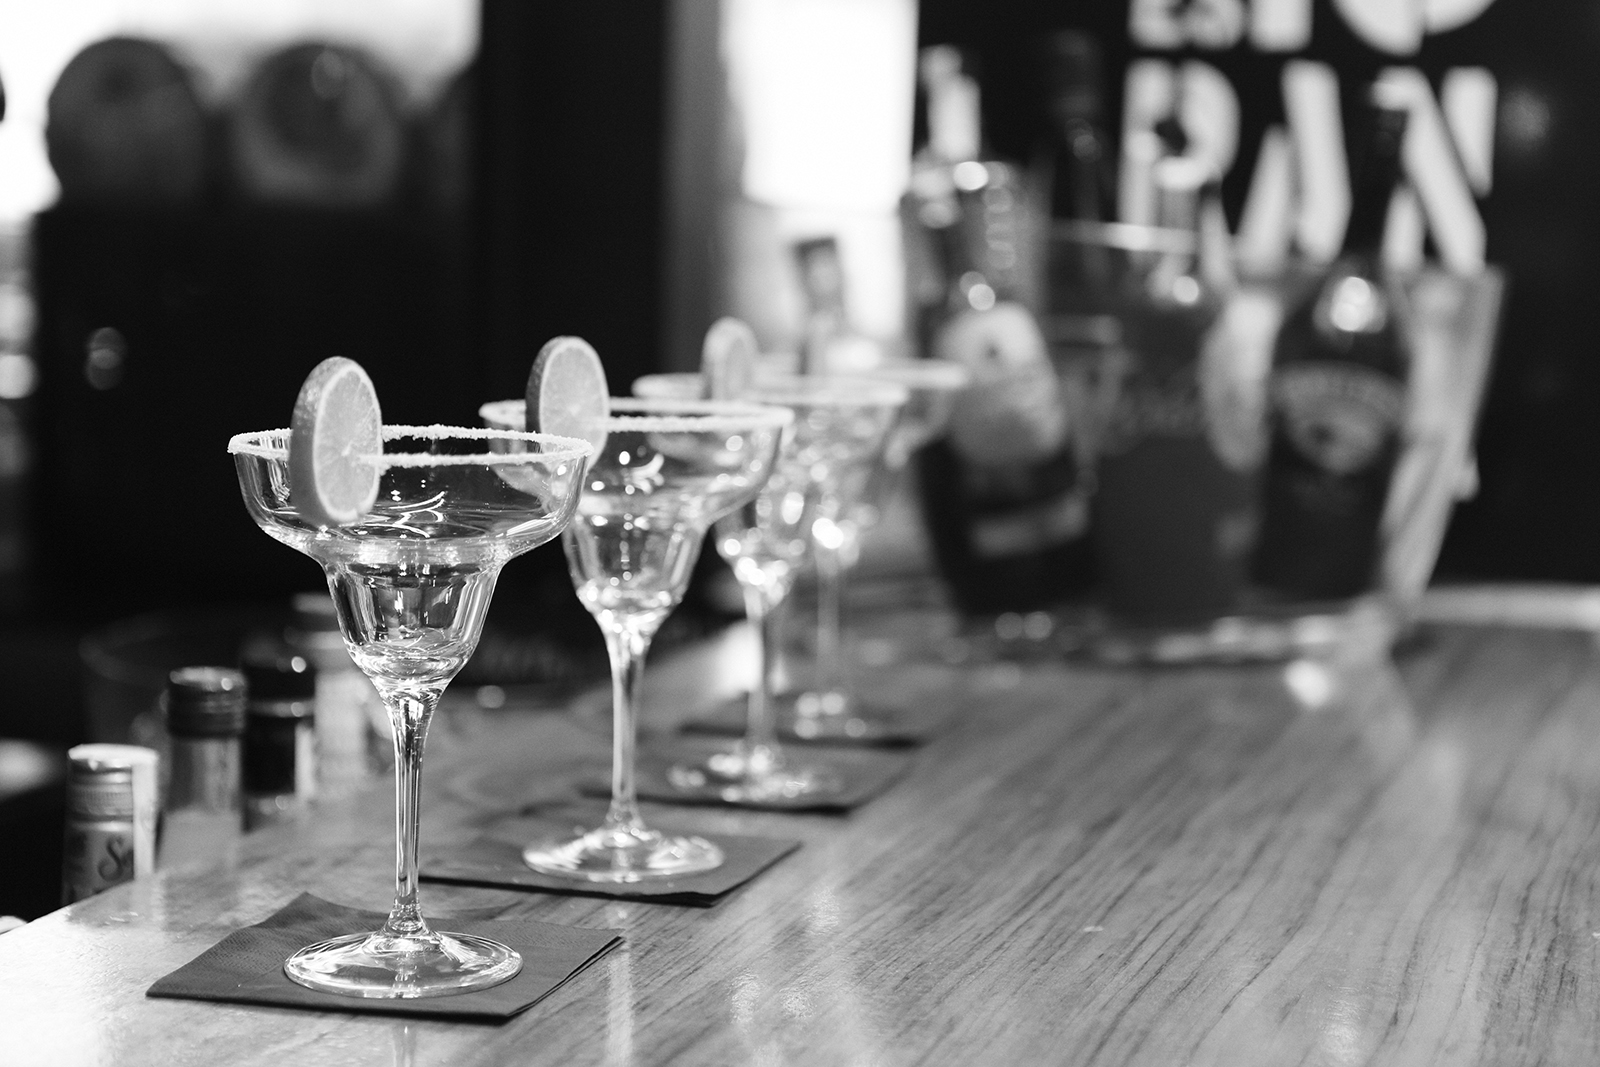 black-and-white-alcohol-bar-drinks